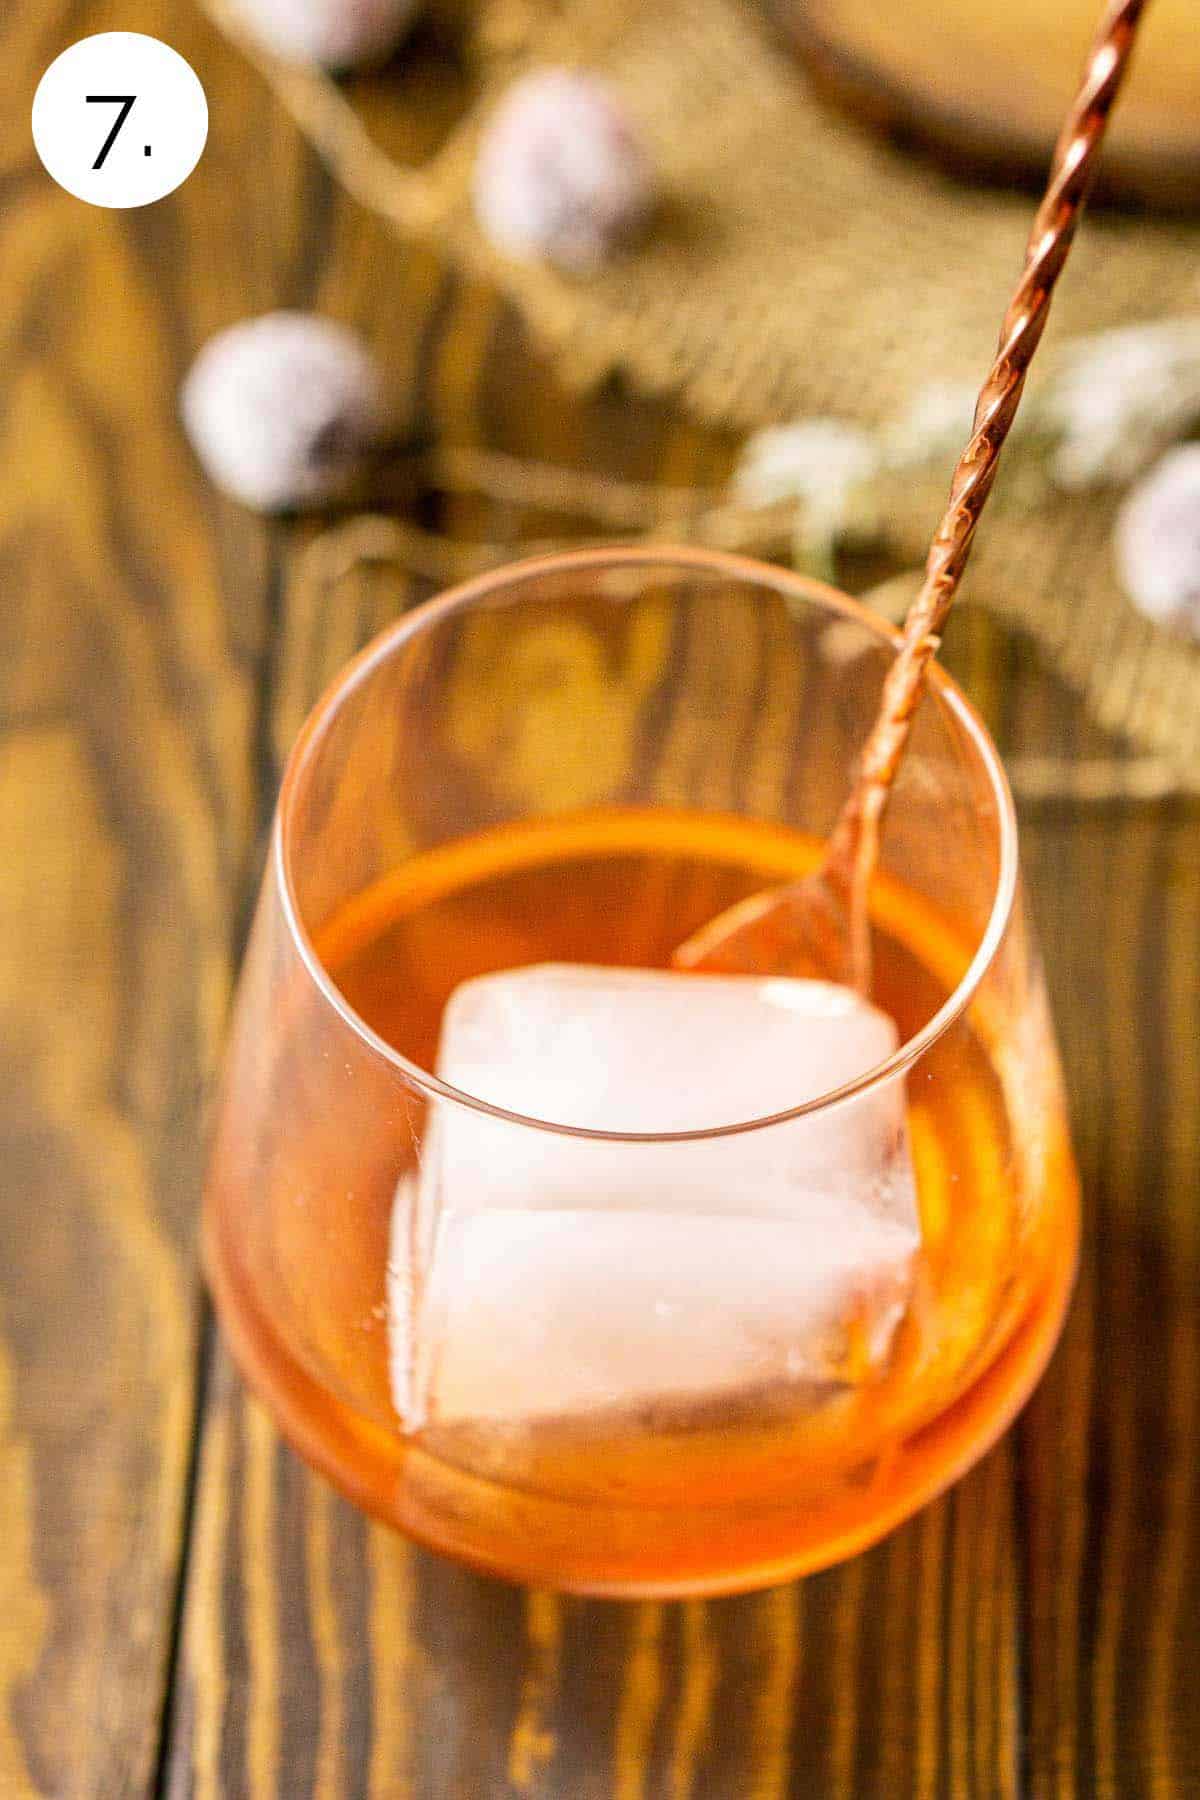 Stirring the ice cube with a copper bar spoon on a wooden surface in the cocktail glass to chill.